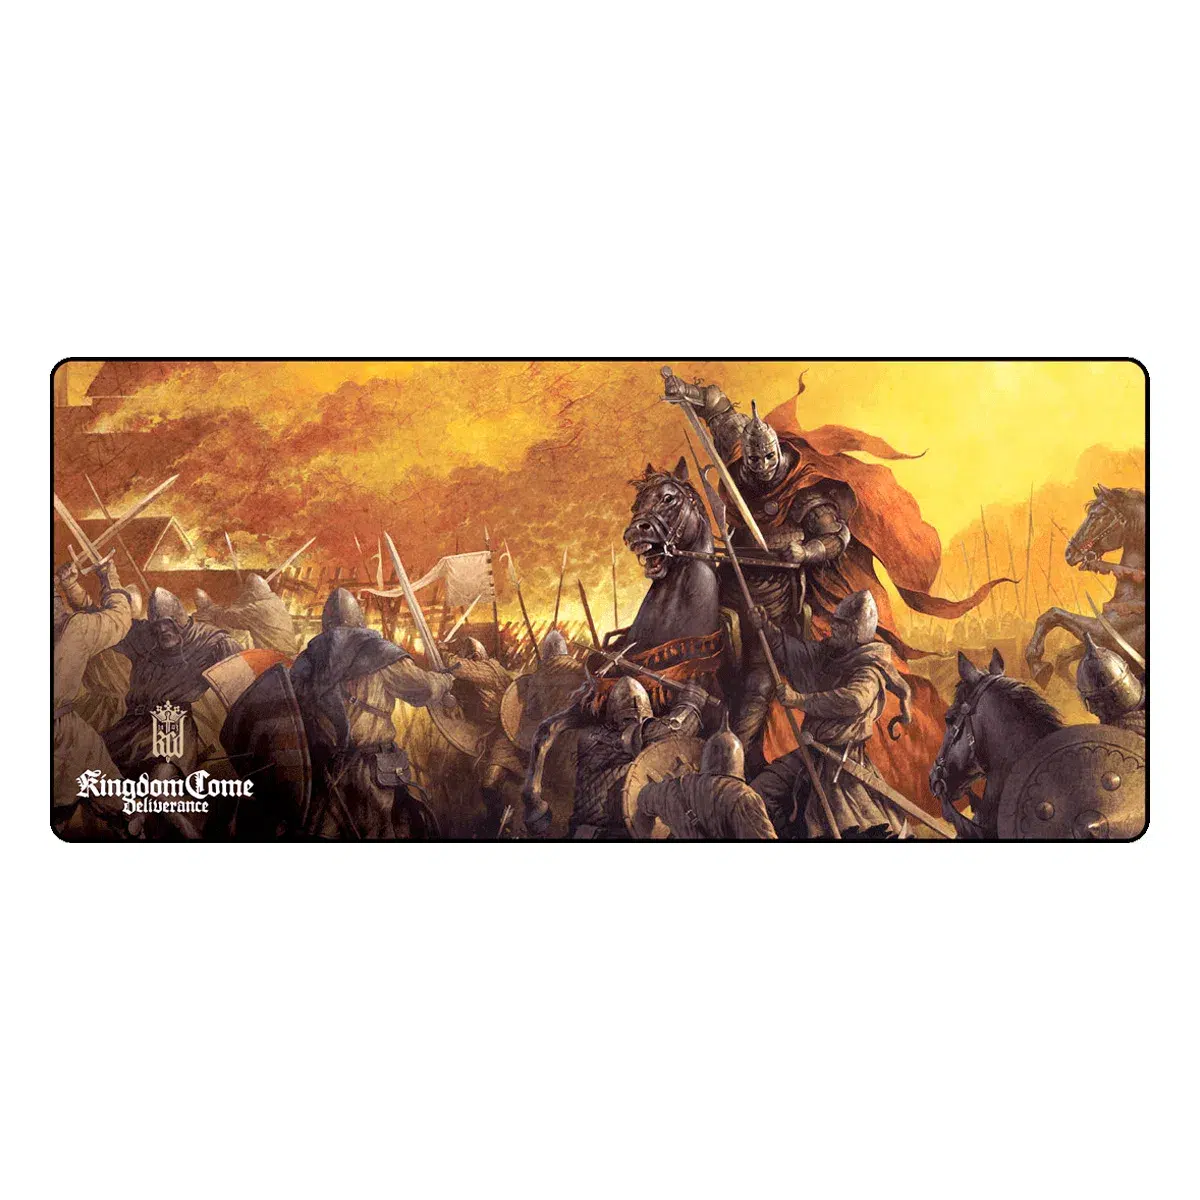 KCD Mousepad "Fighting Knight" Cover